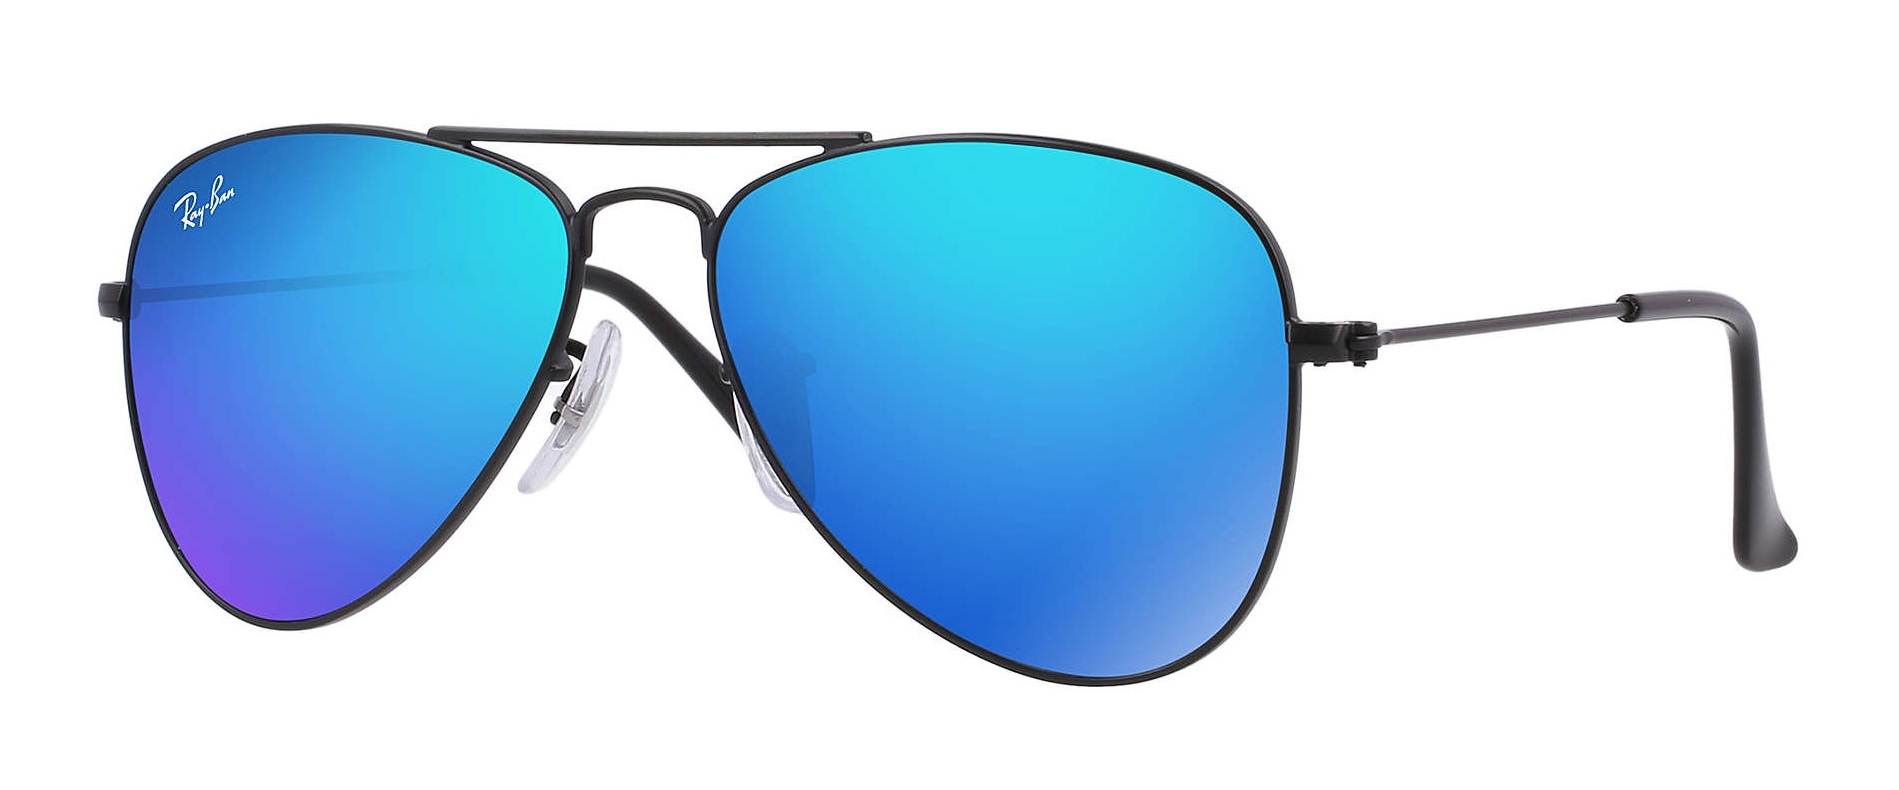 Ray-Ban Junior Aviator in Black Metal Frame with Blue Mirror Lenses